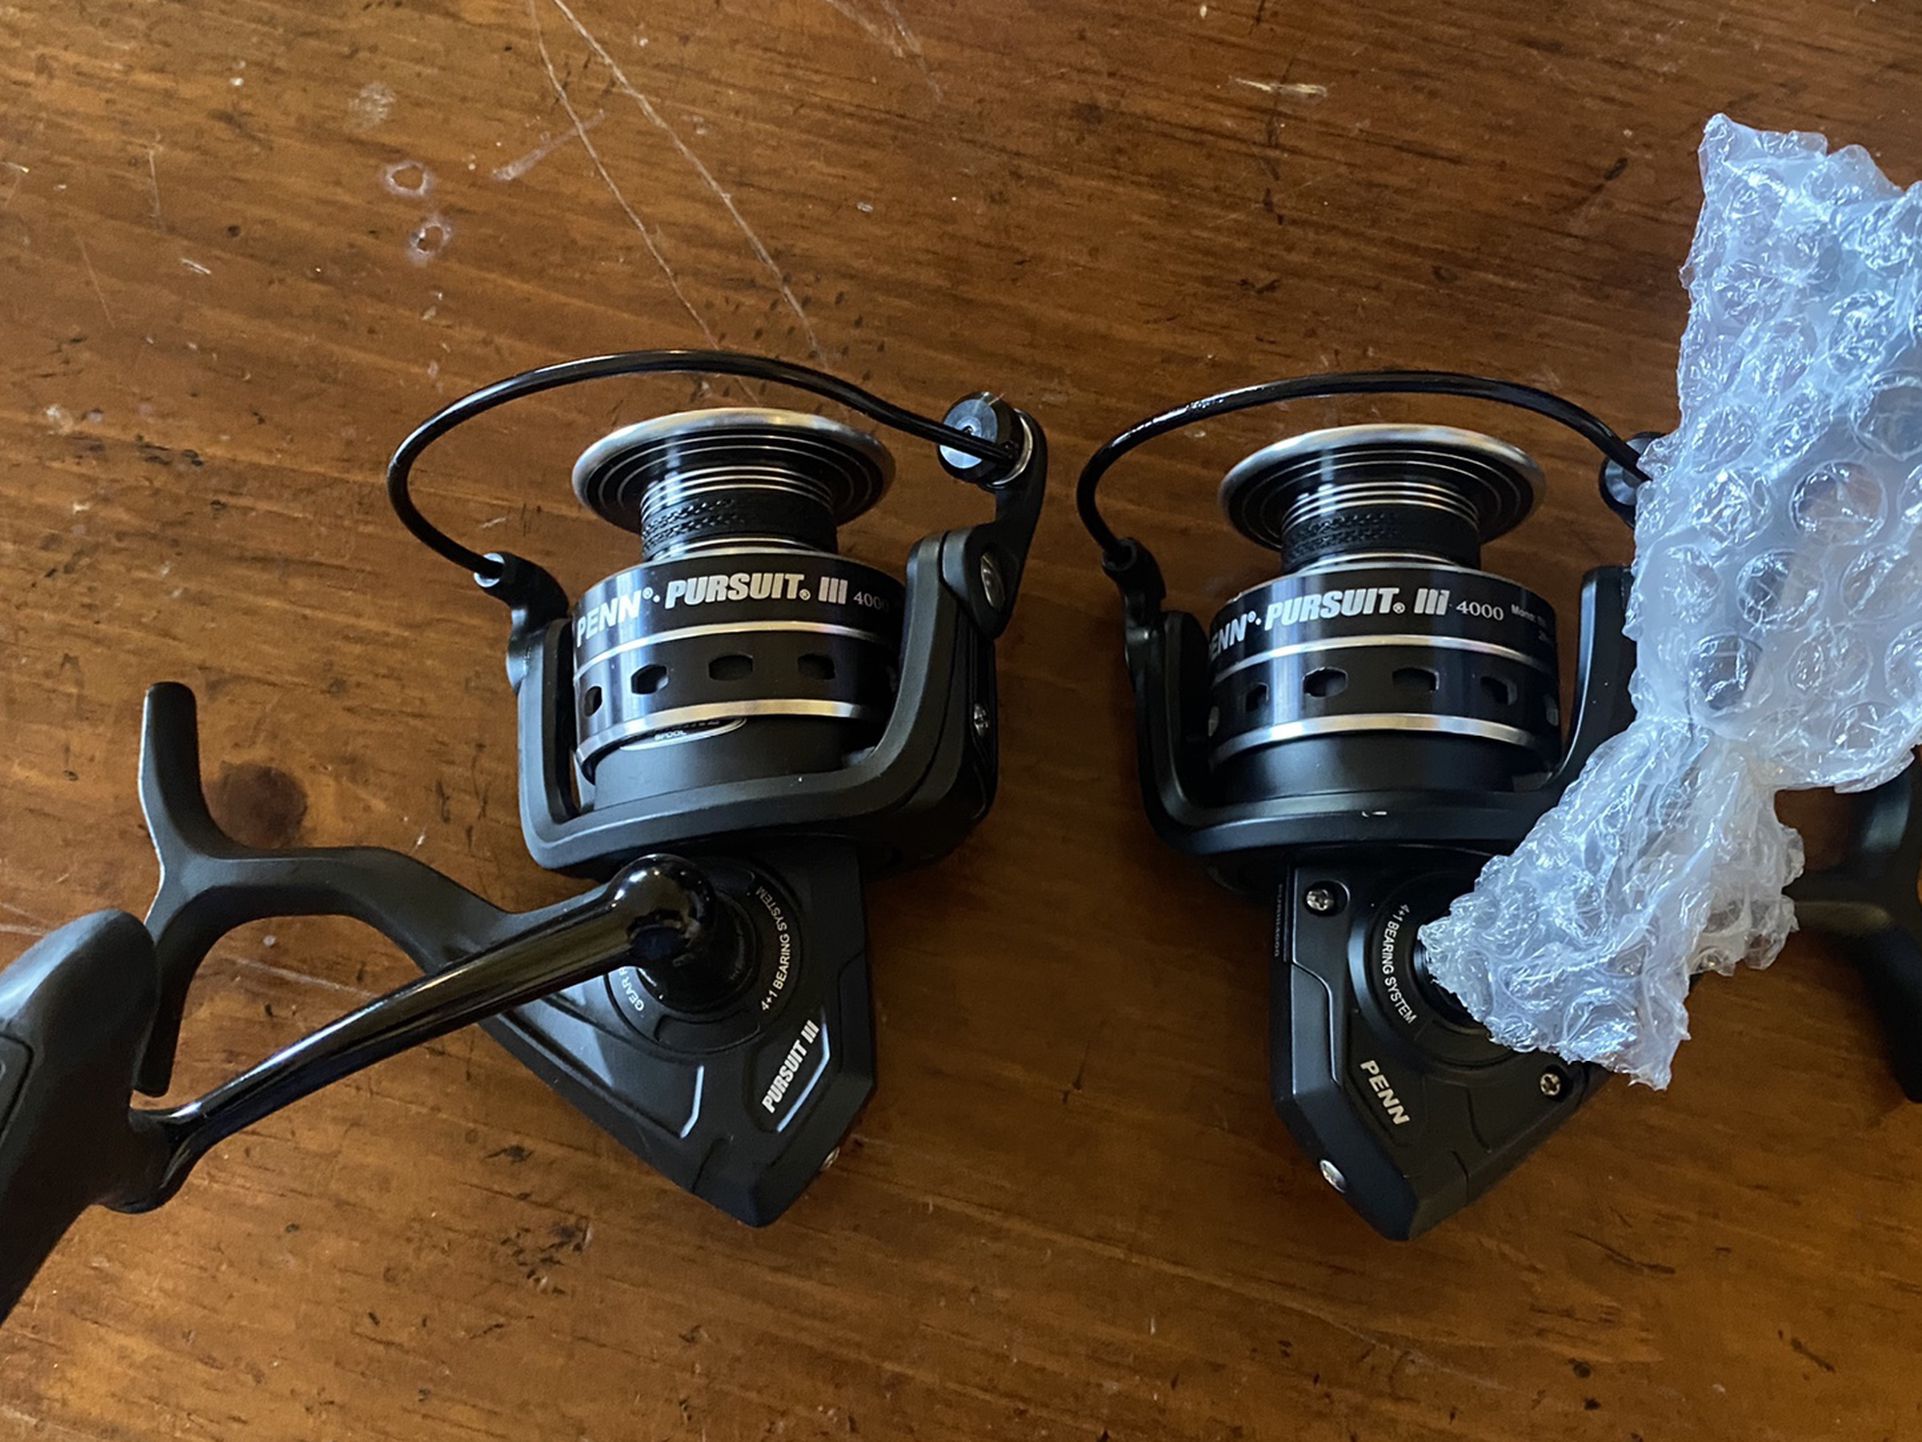 New Penn Pursuit 3 4000 Spinning Reels